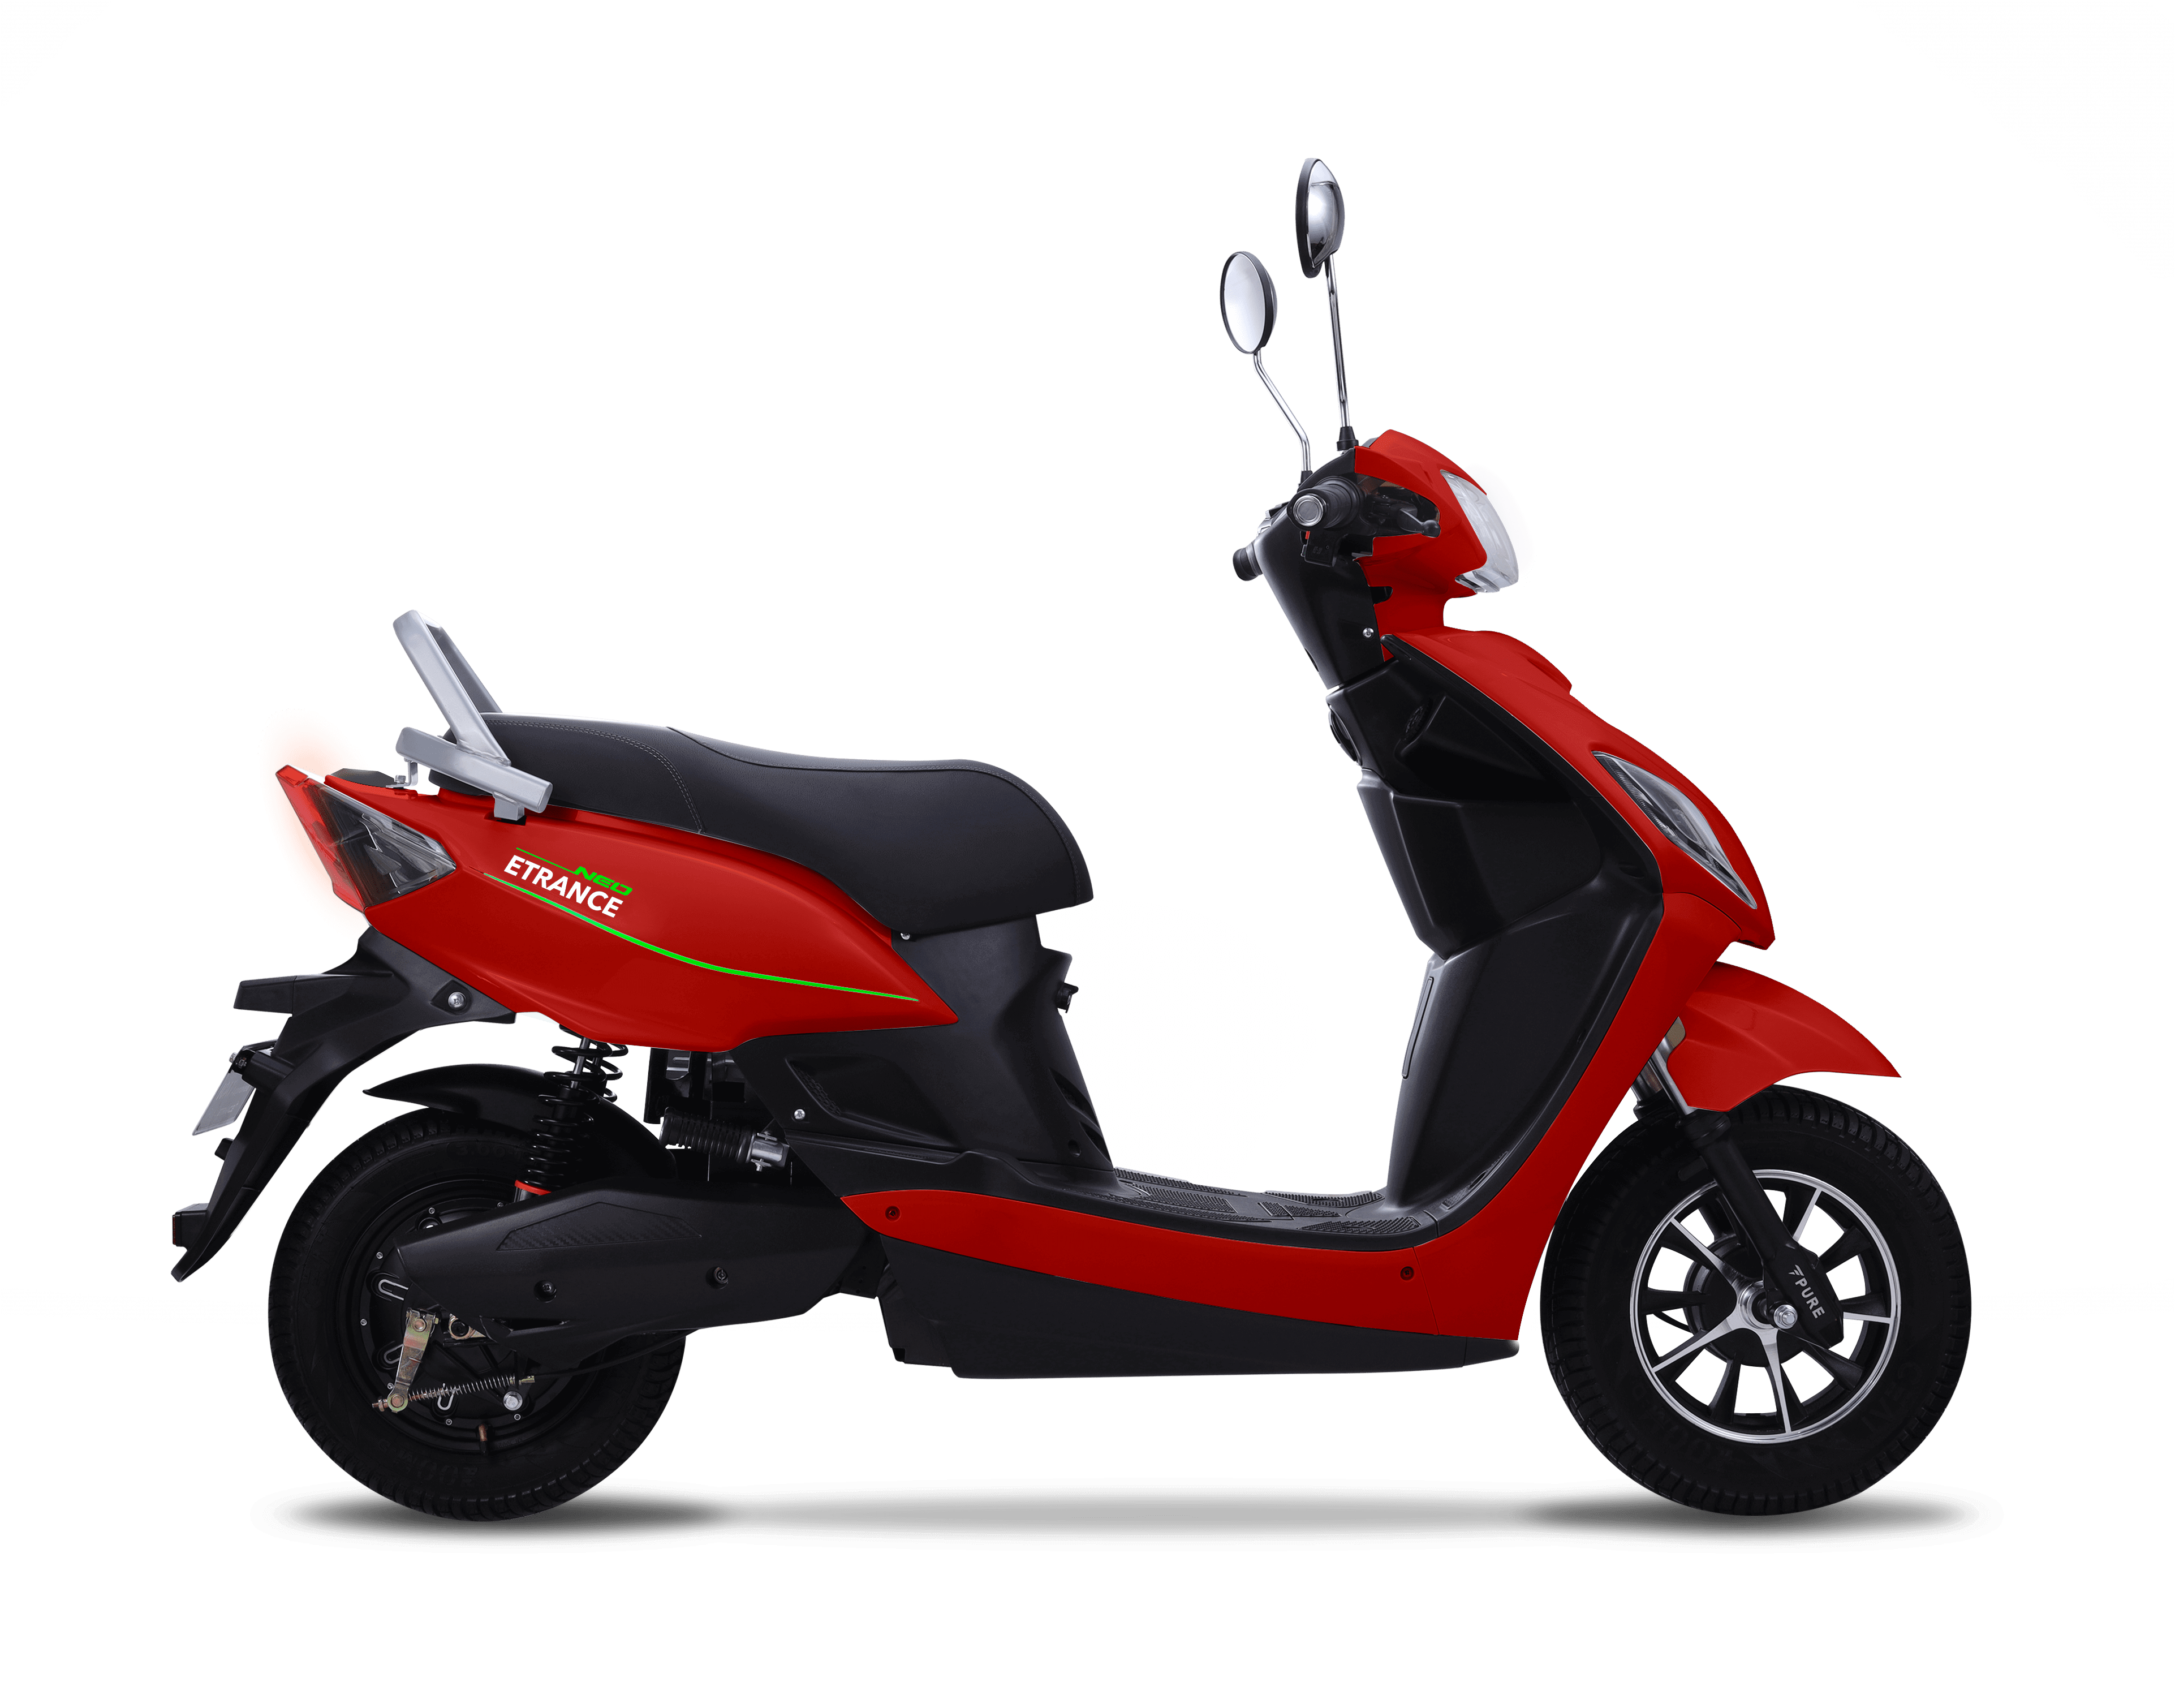 https://e-vehicleinfo.com/top-10-electric-scooters-for-women-in-india-2021/